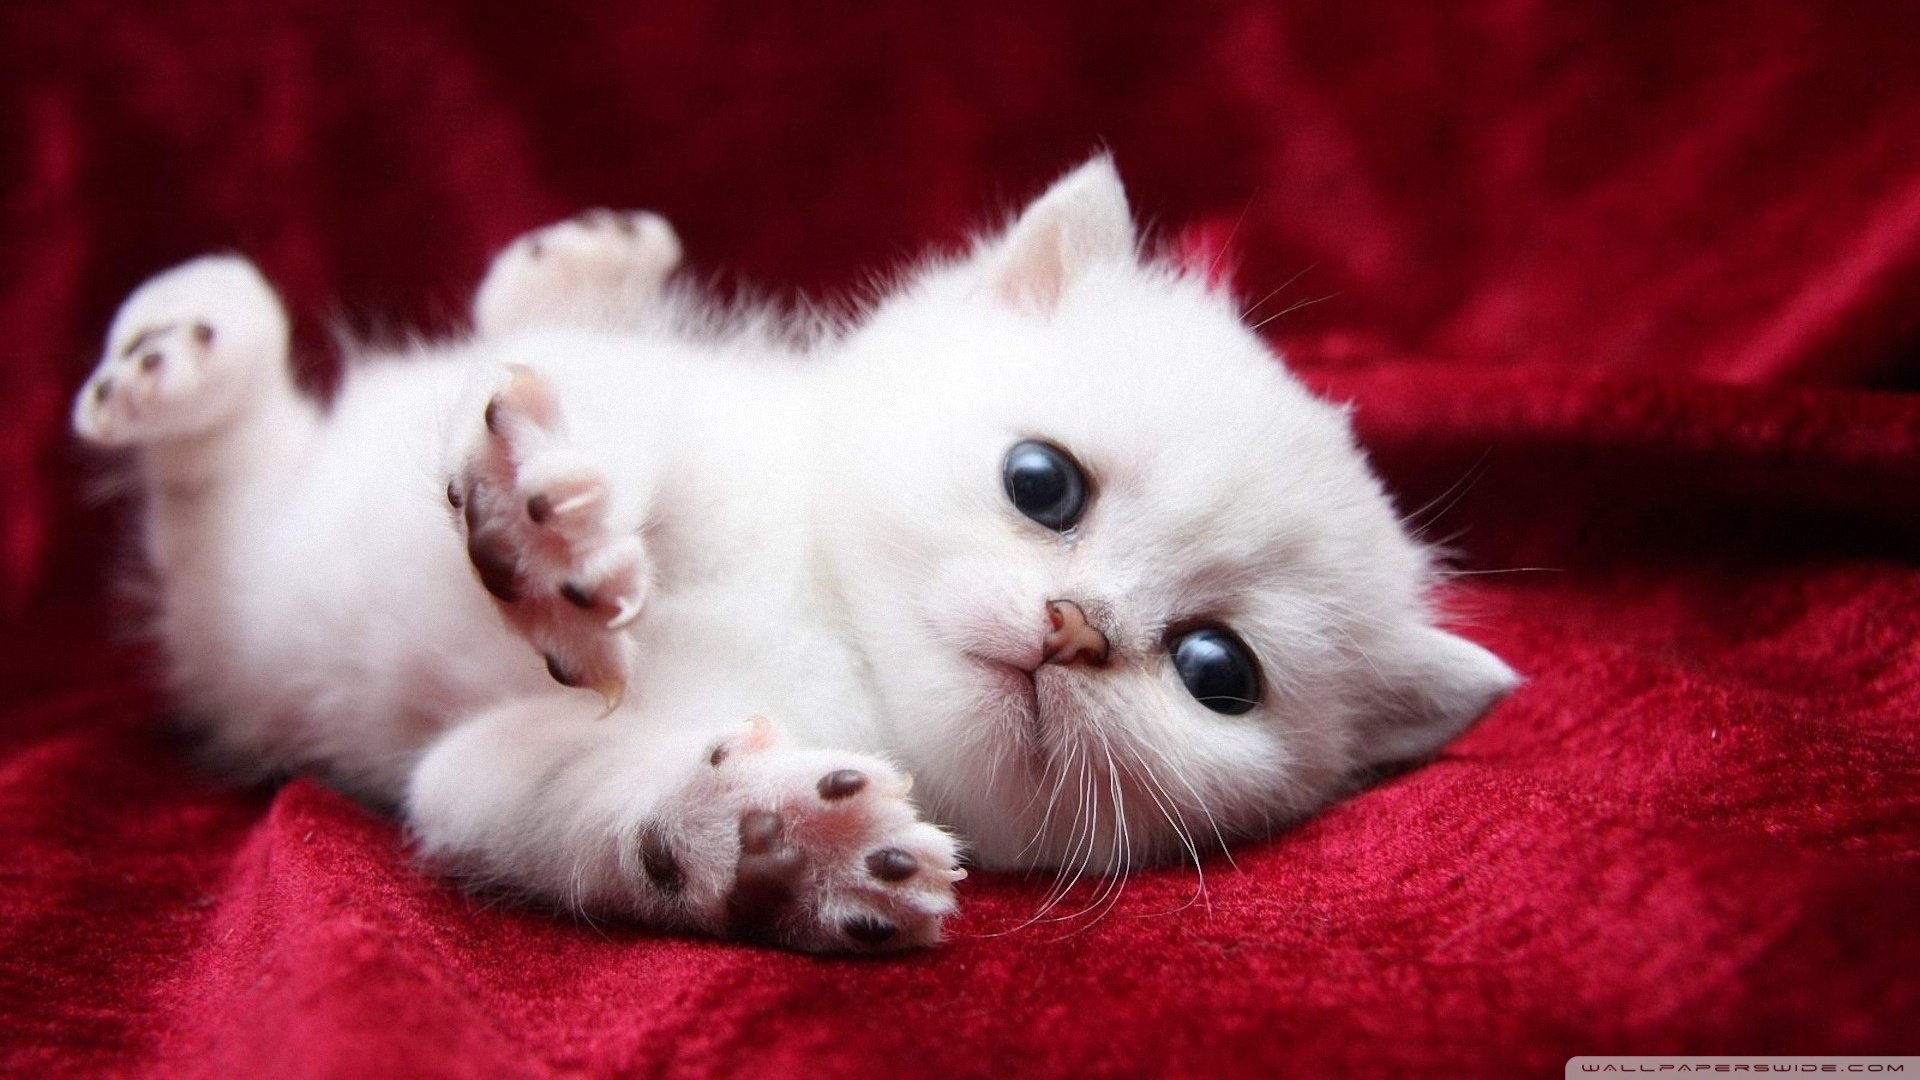 18 Adorable kitty cat wallpapers